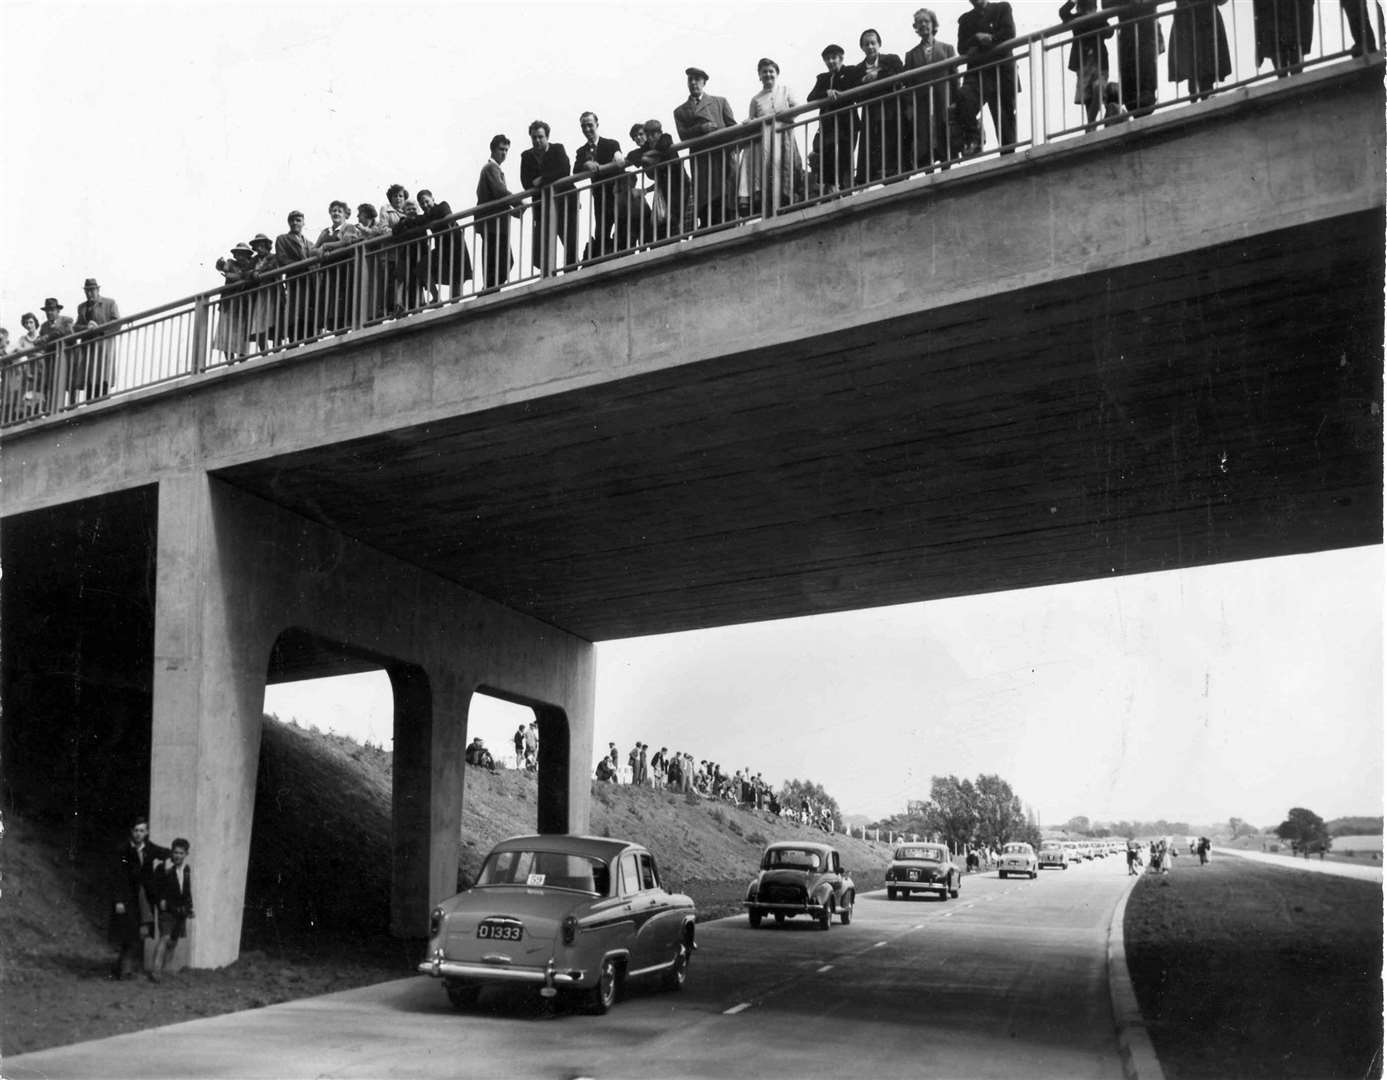 Crowds gathered to watch a cavalcade of vehicles to mark the opening of Ashford bypass in 1973 which brought relief to the traffic-choked town centre. Picture: Images of Ashford by Mike Bennett